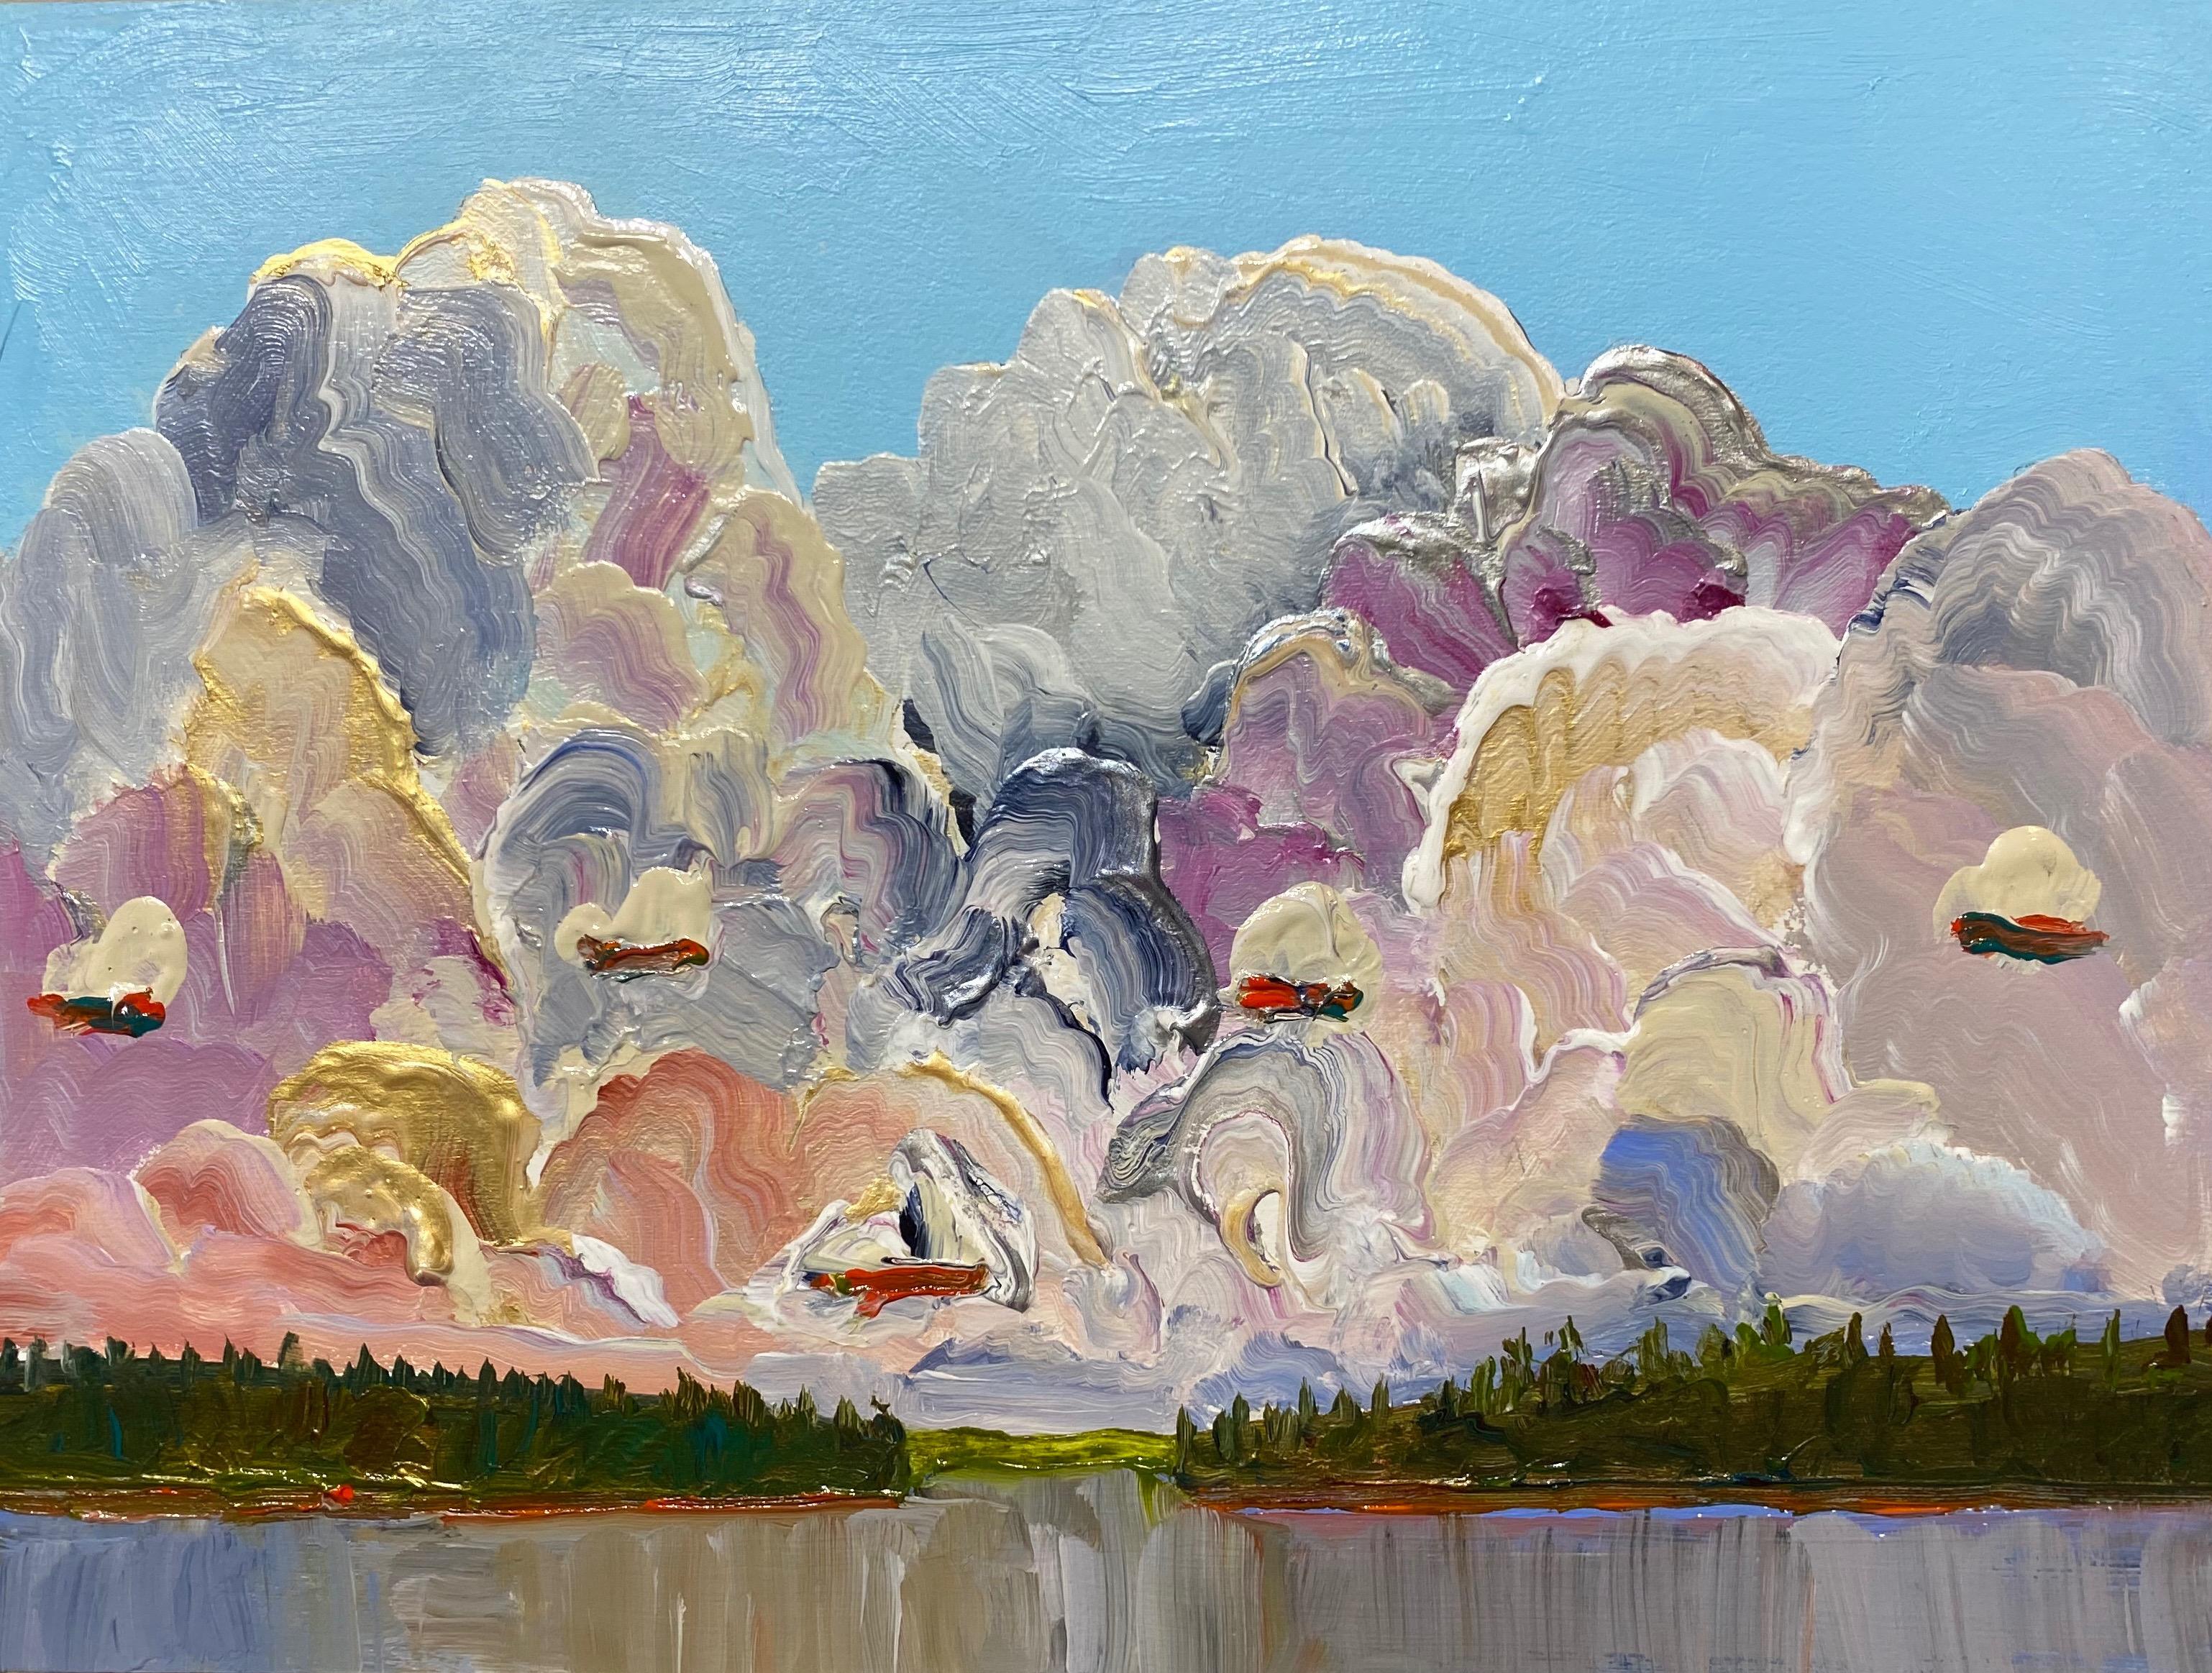 Swirling Clouds Over Calm Water - Painting by Gregory Hardy